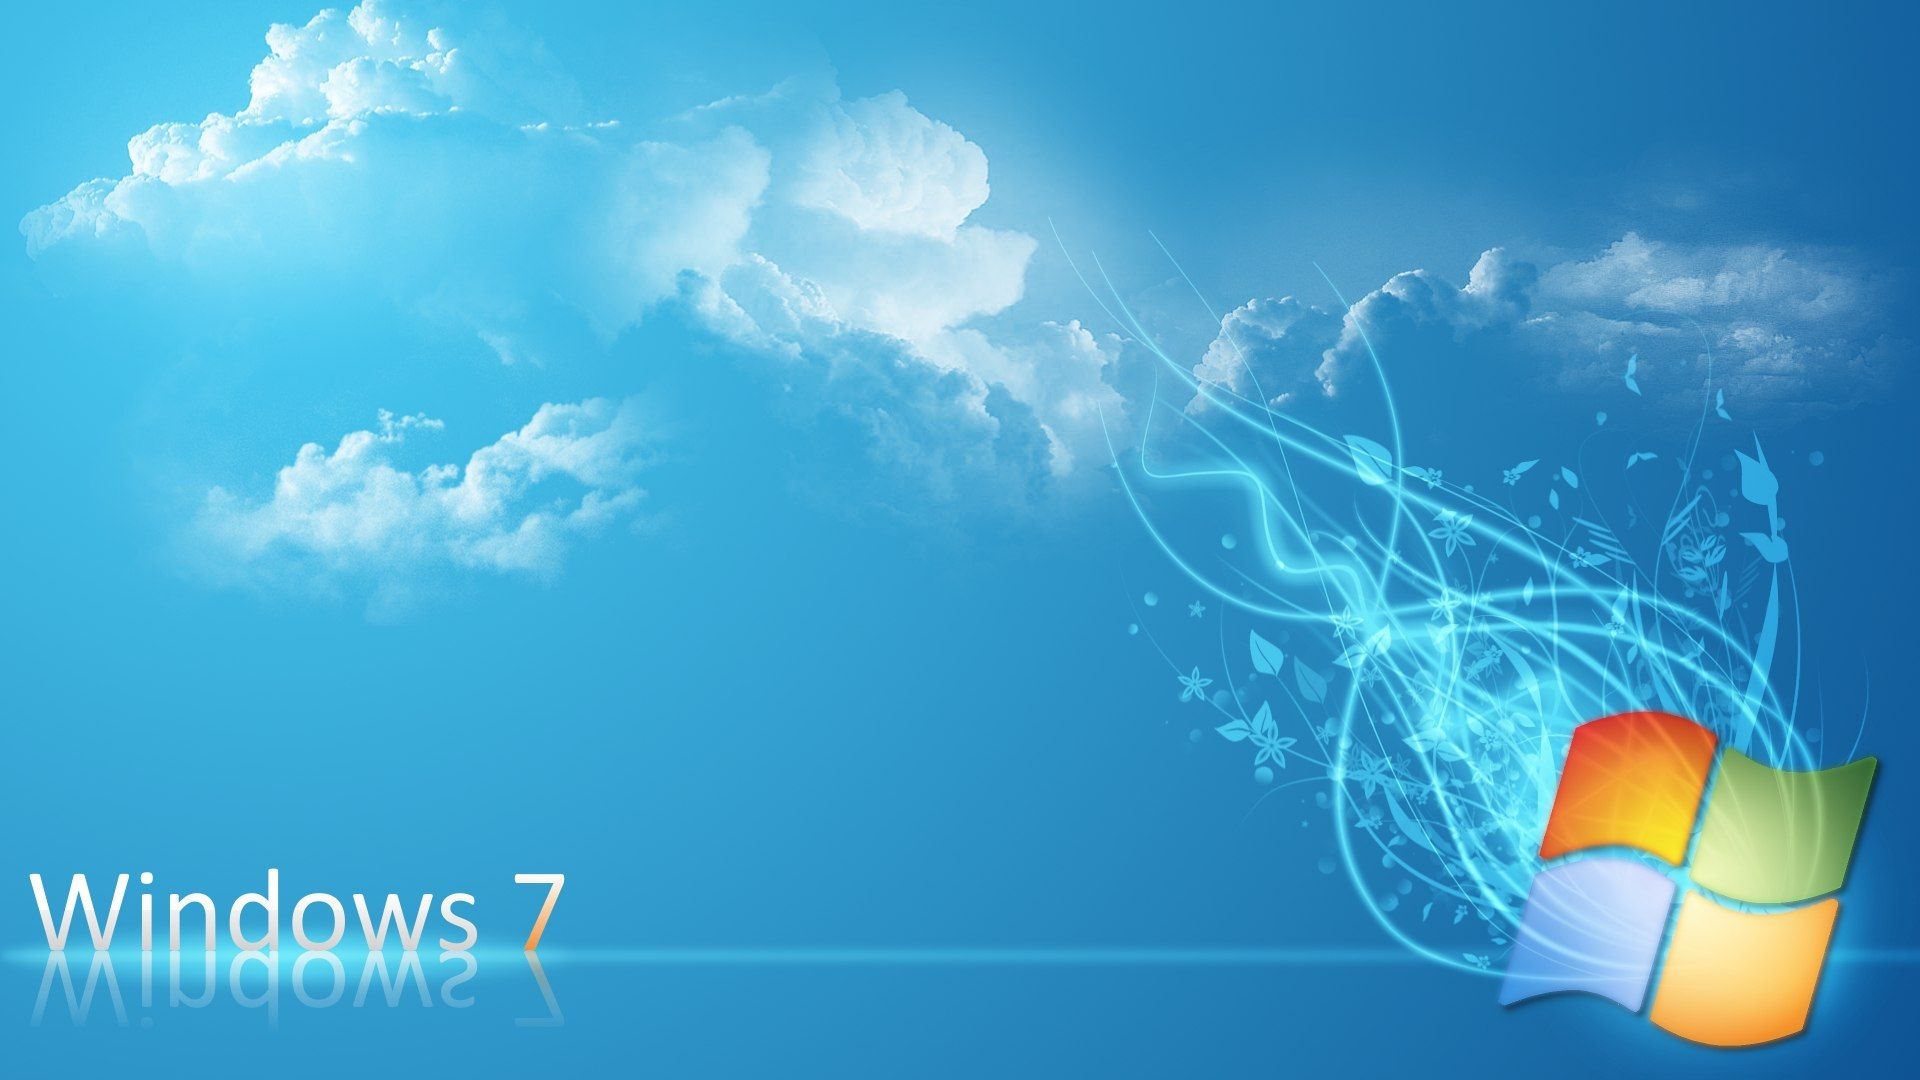 Windows 7 wallpapers hd high definition - - High Quality